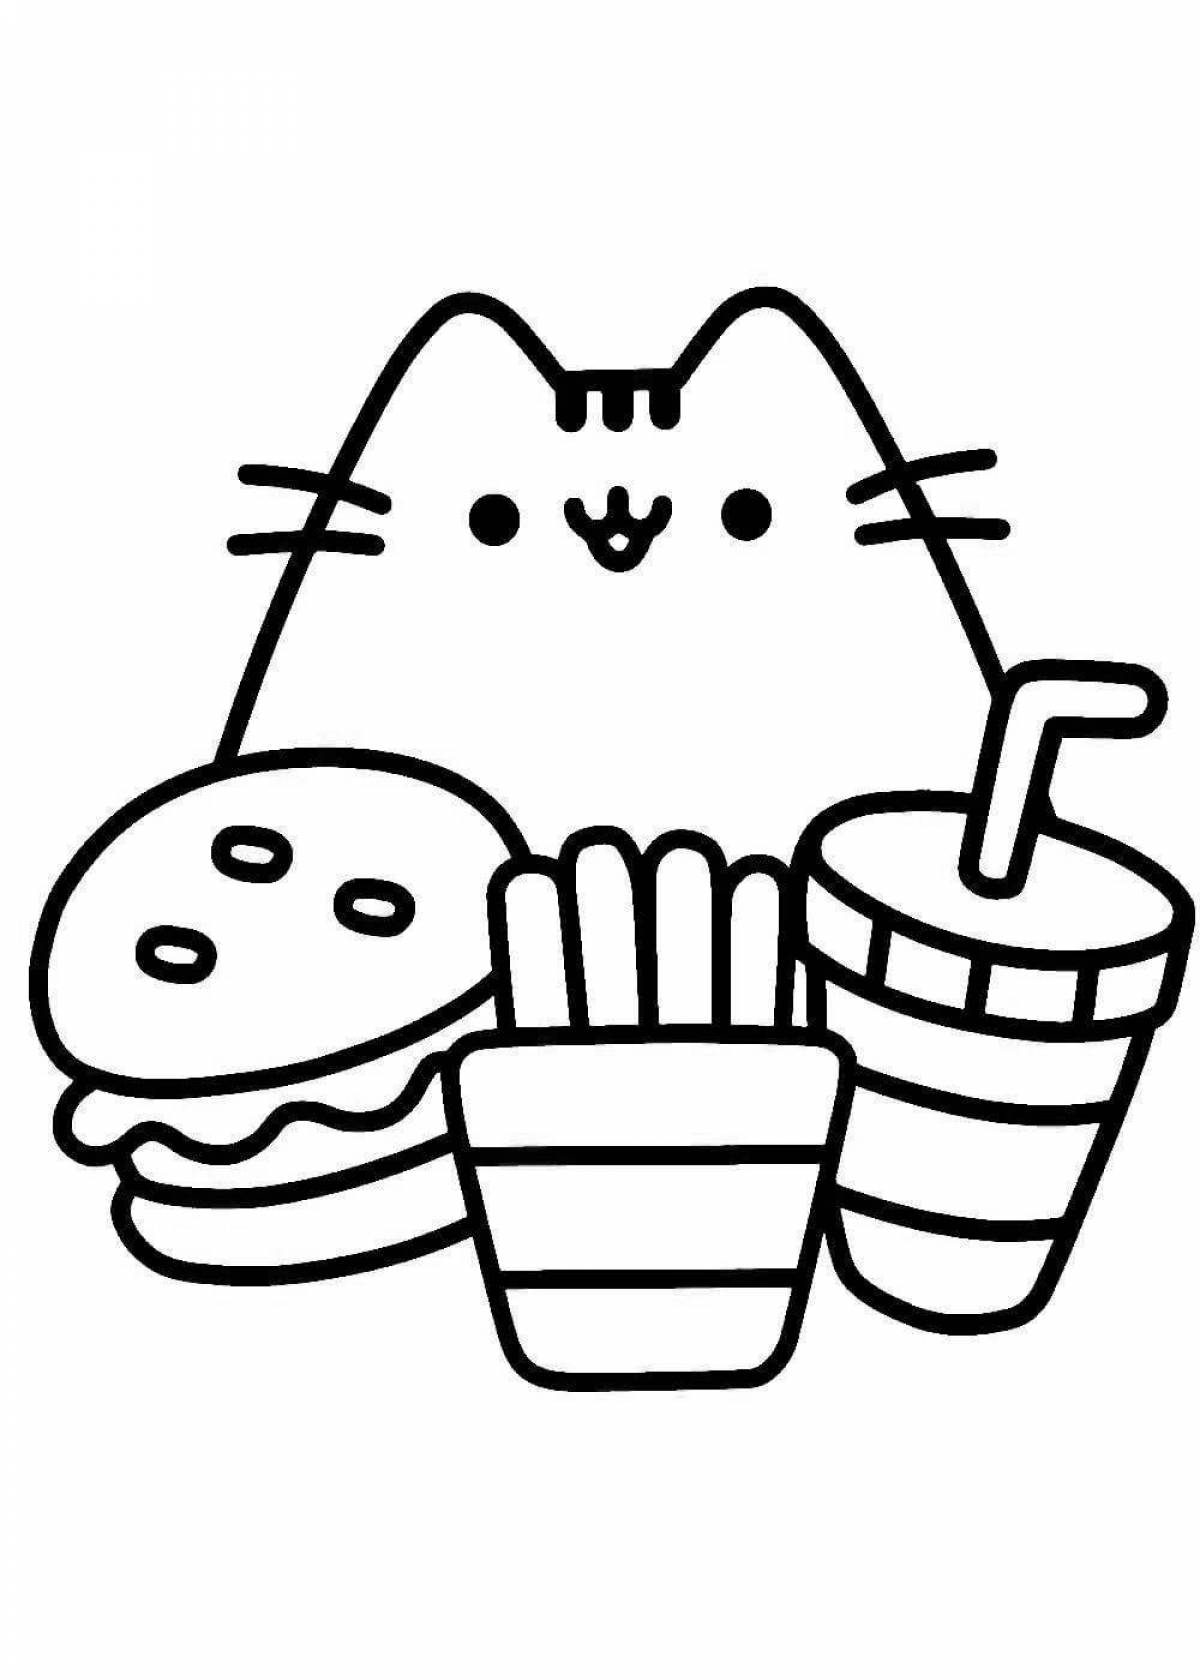 Cute push cat coloring page